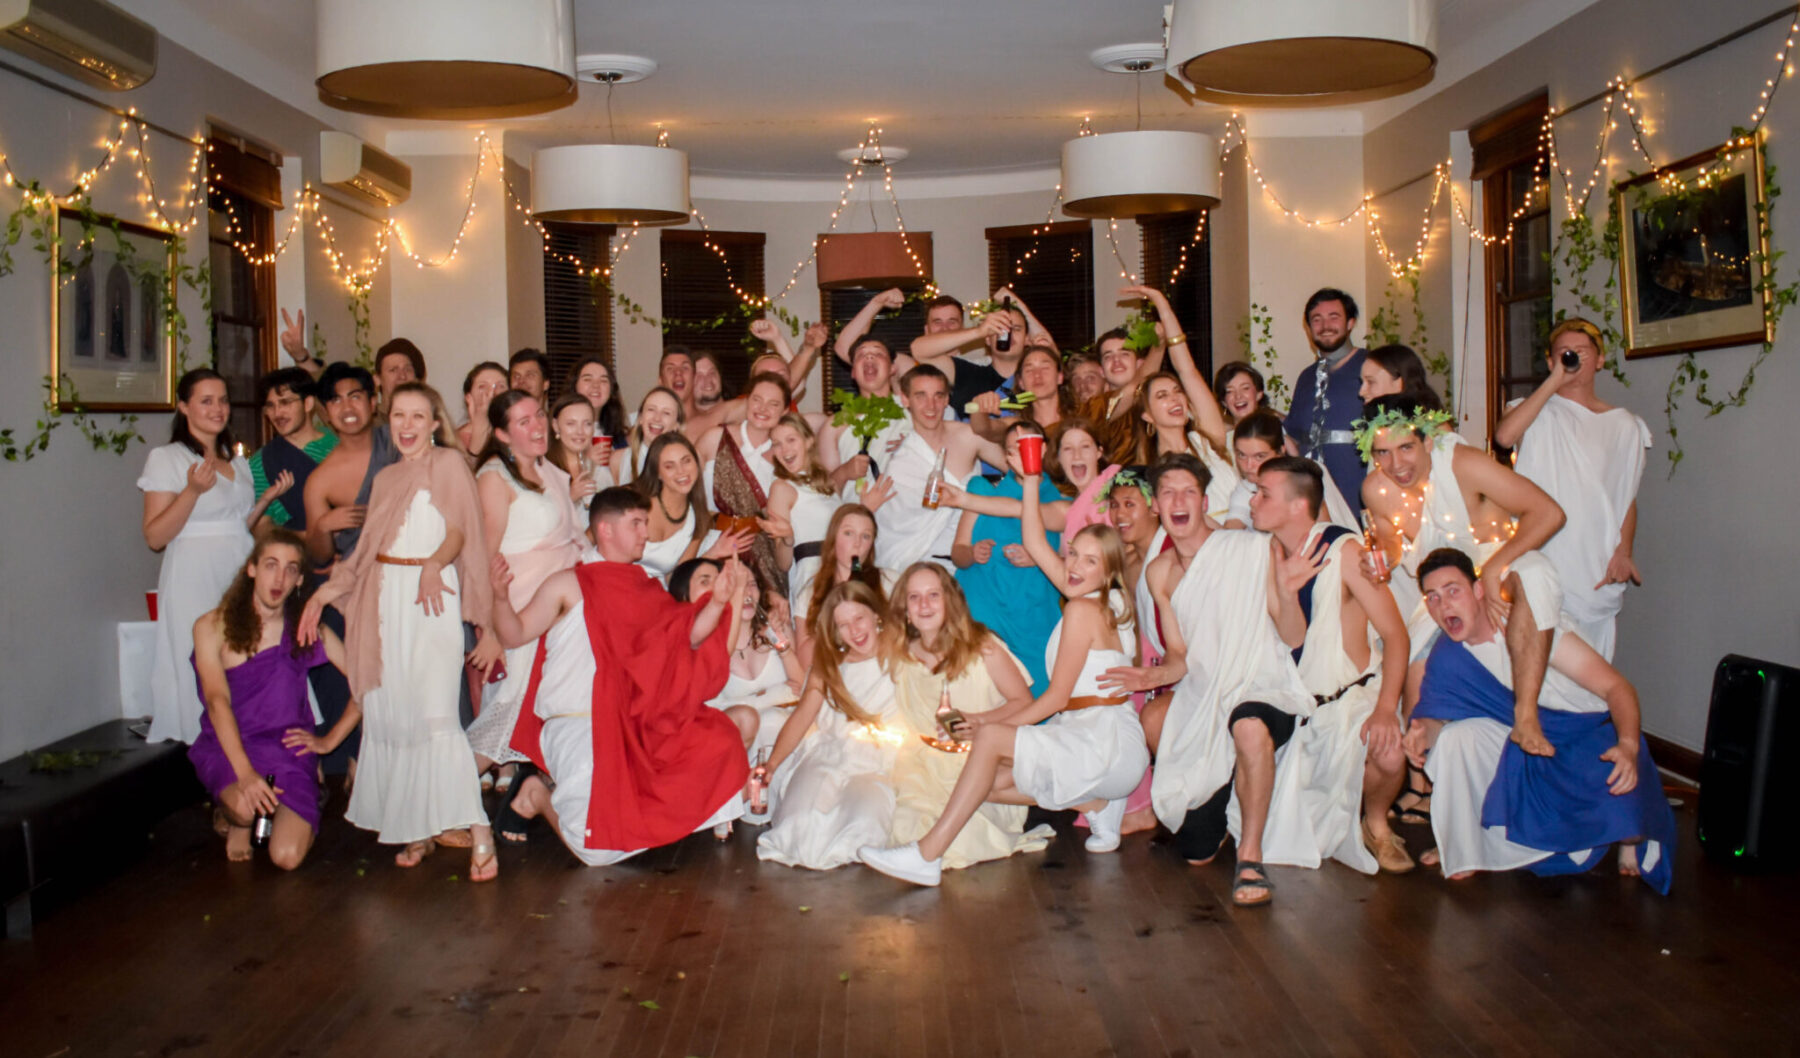 Classics-Week-Toga-Party-2021-Edited-24-scaled-1. Campion College Australia.